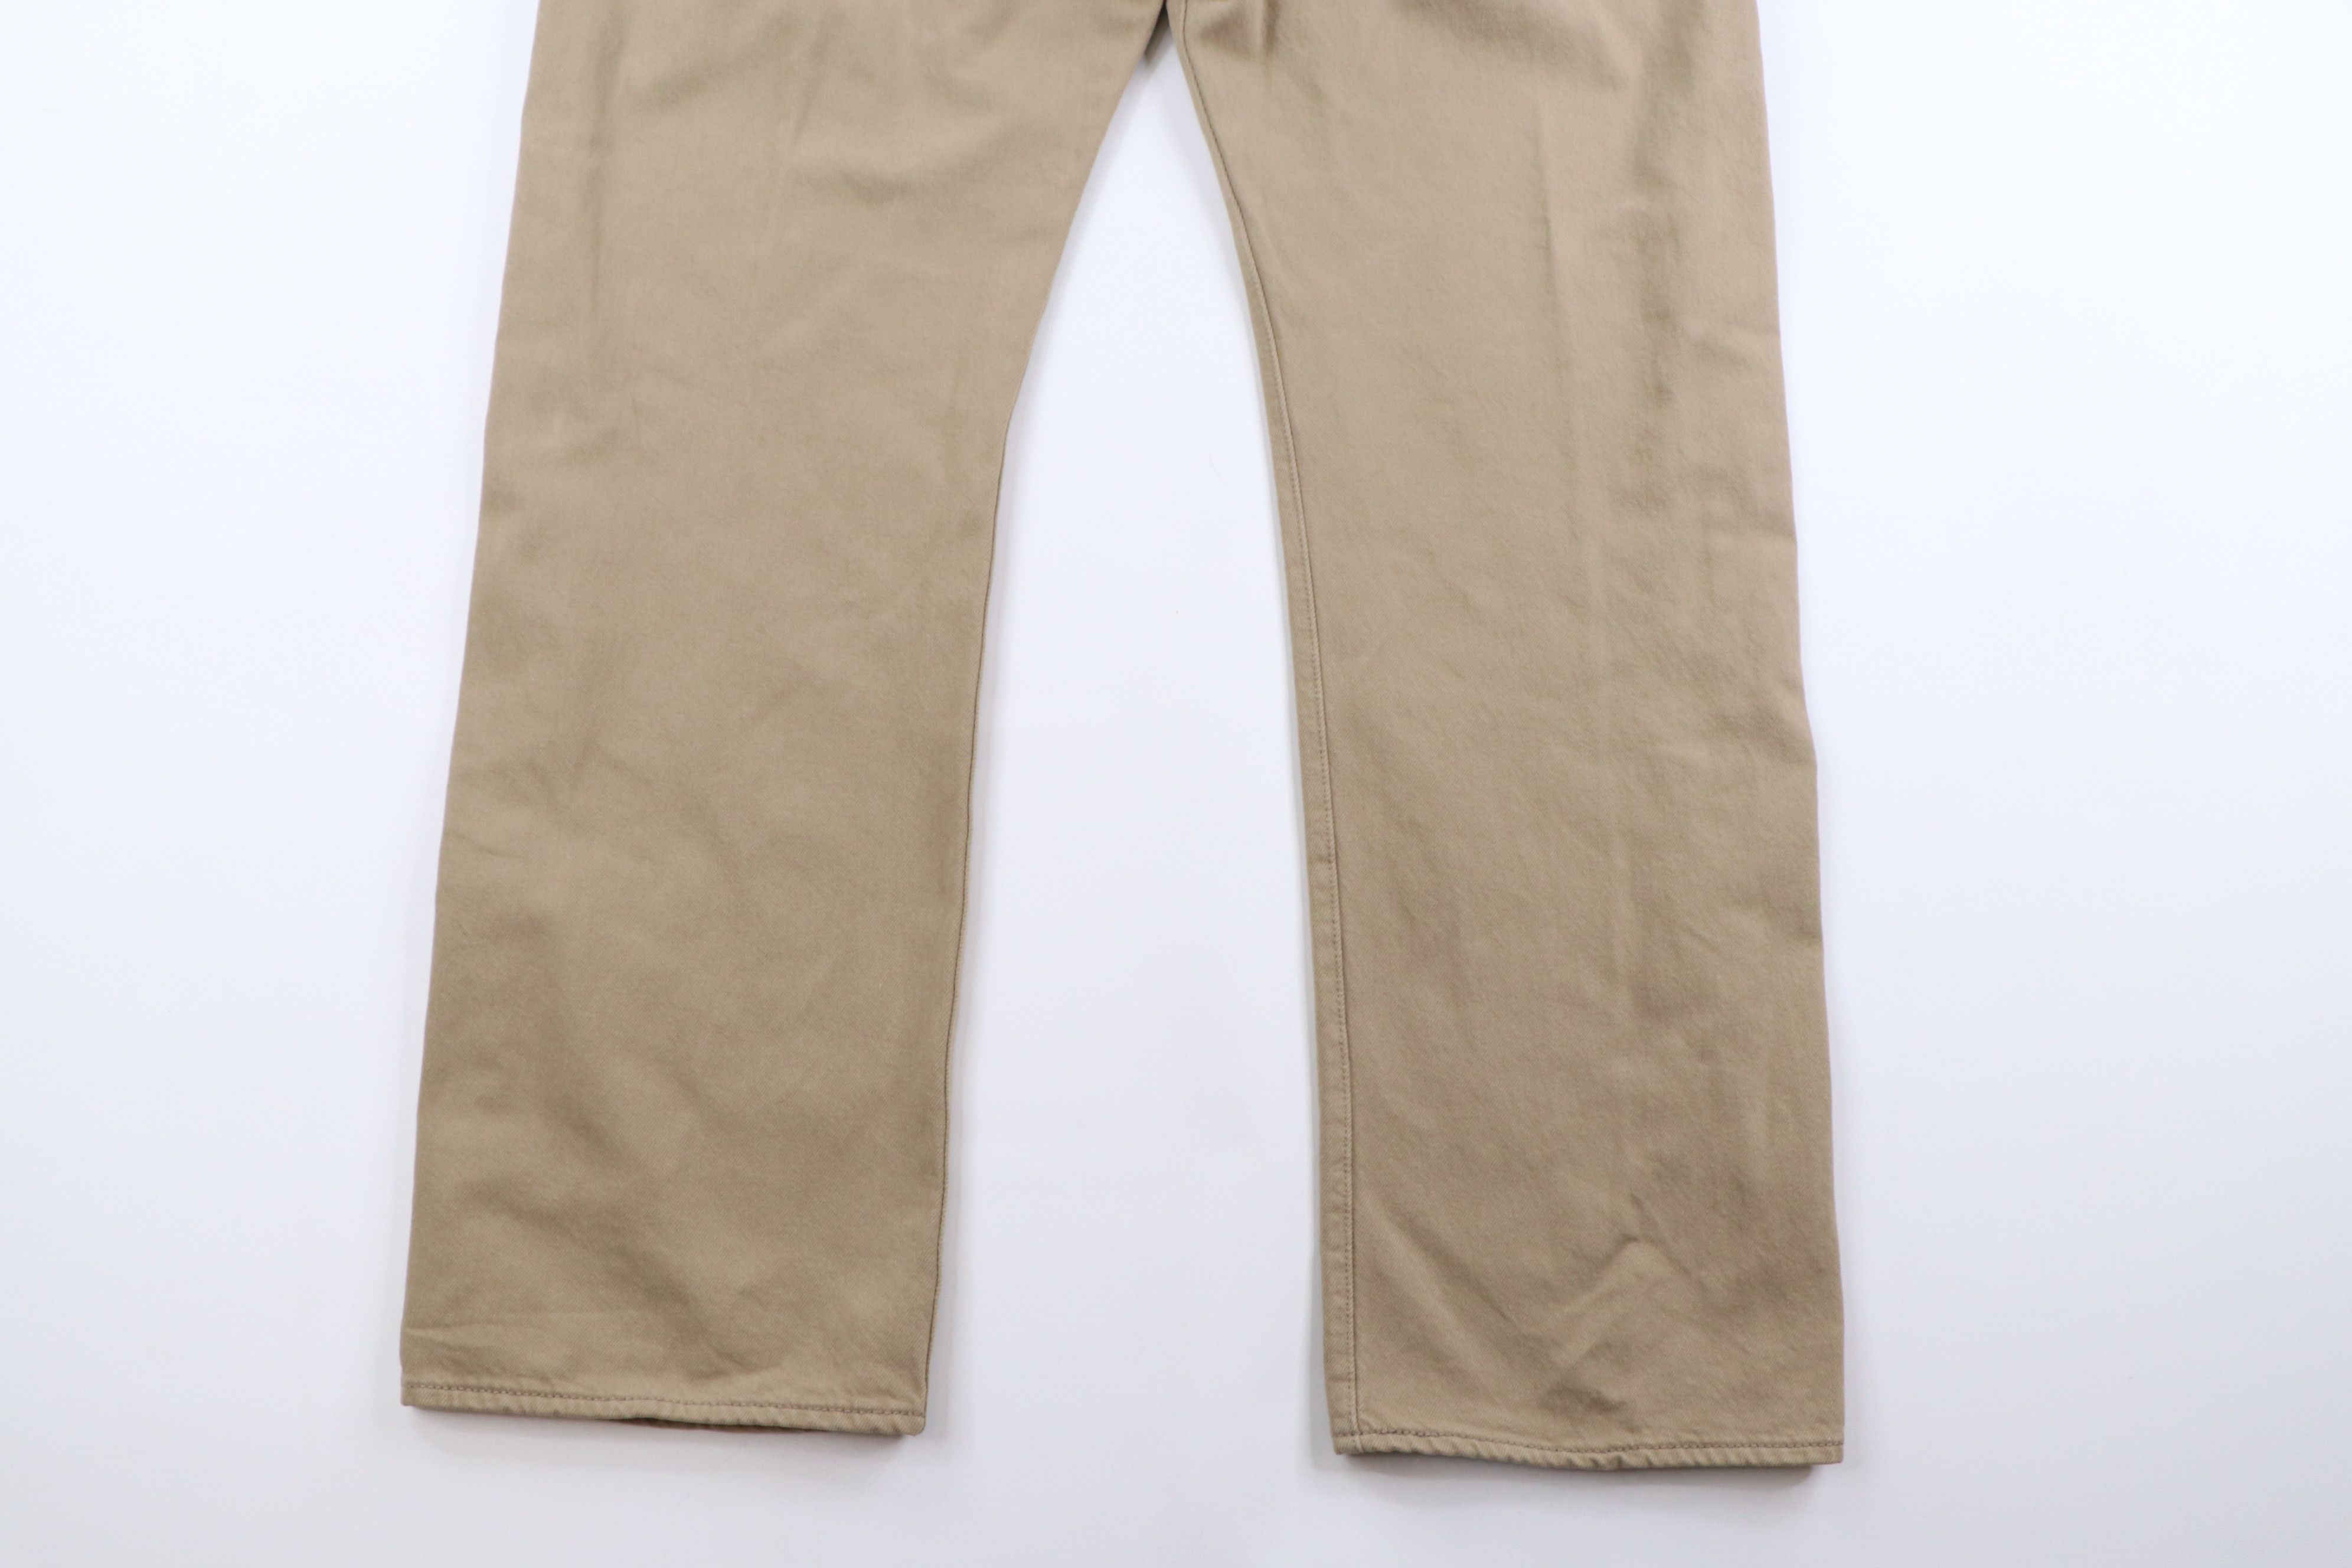 Vintage Paul & Shark Stonewash Pleated Flying Chino Pants Cotton Size US 36 / EU 52 - 2 Preview